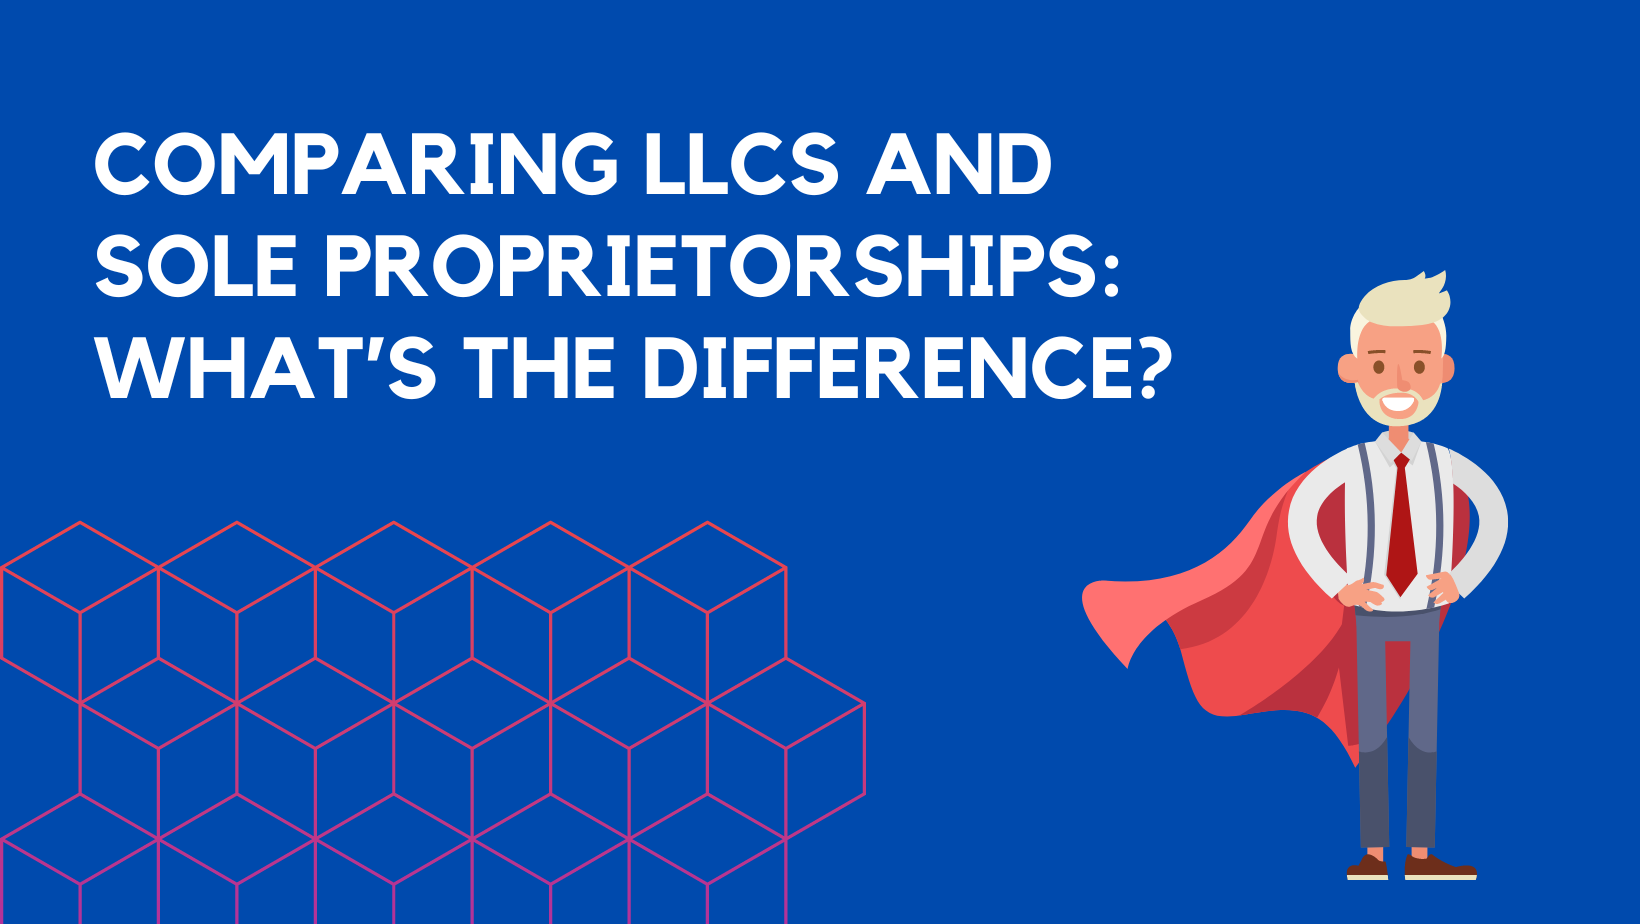 Comparing LLCs and Sole Proprietorships: What’s the Difference?